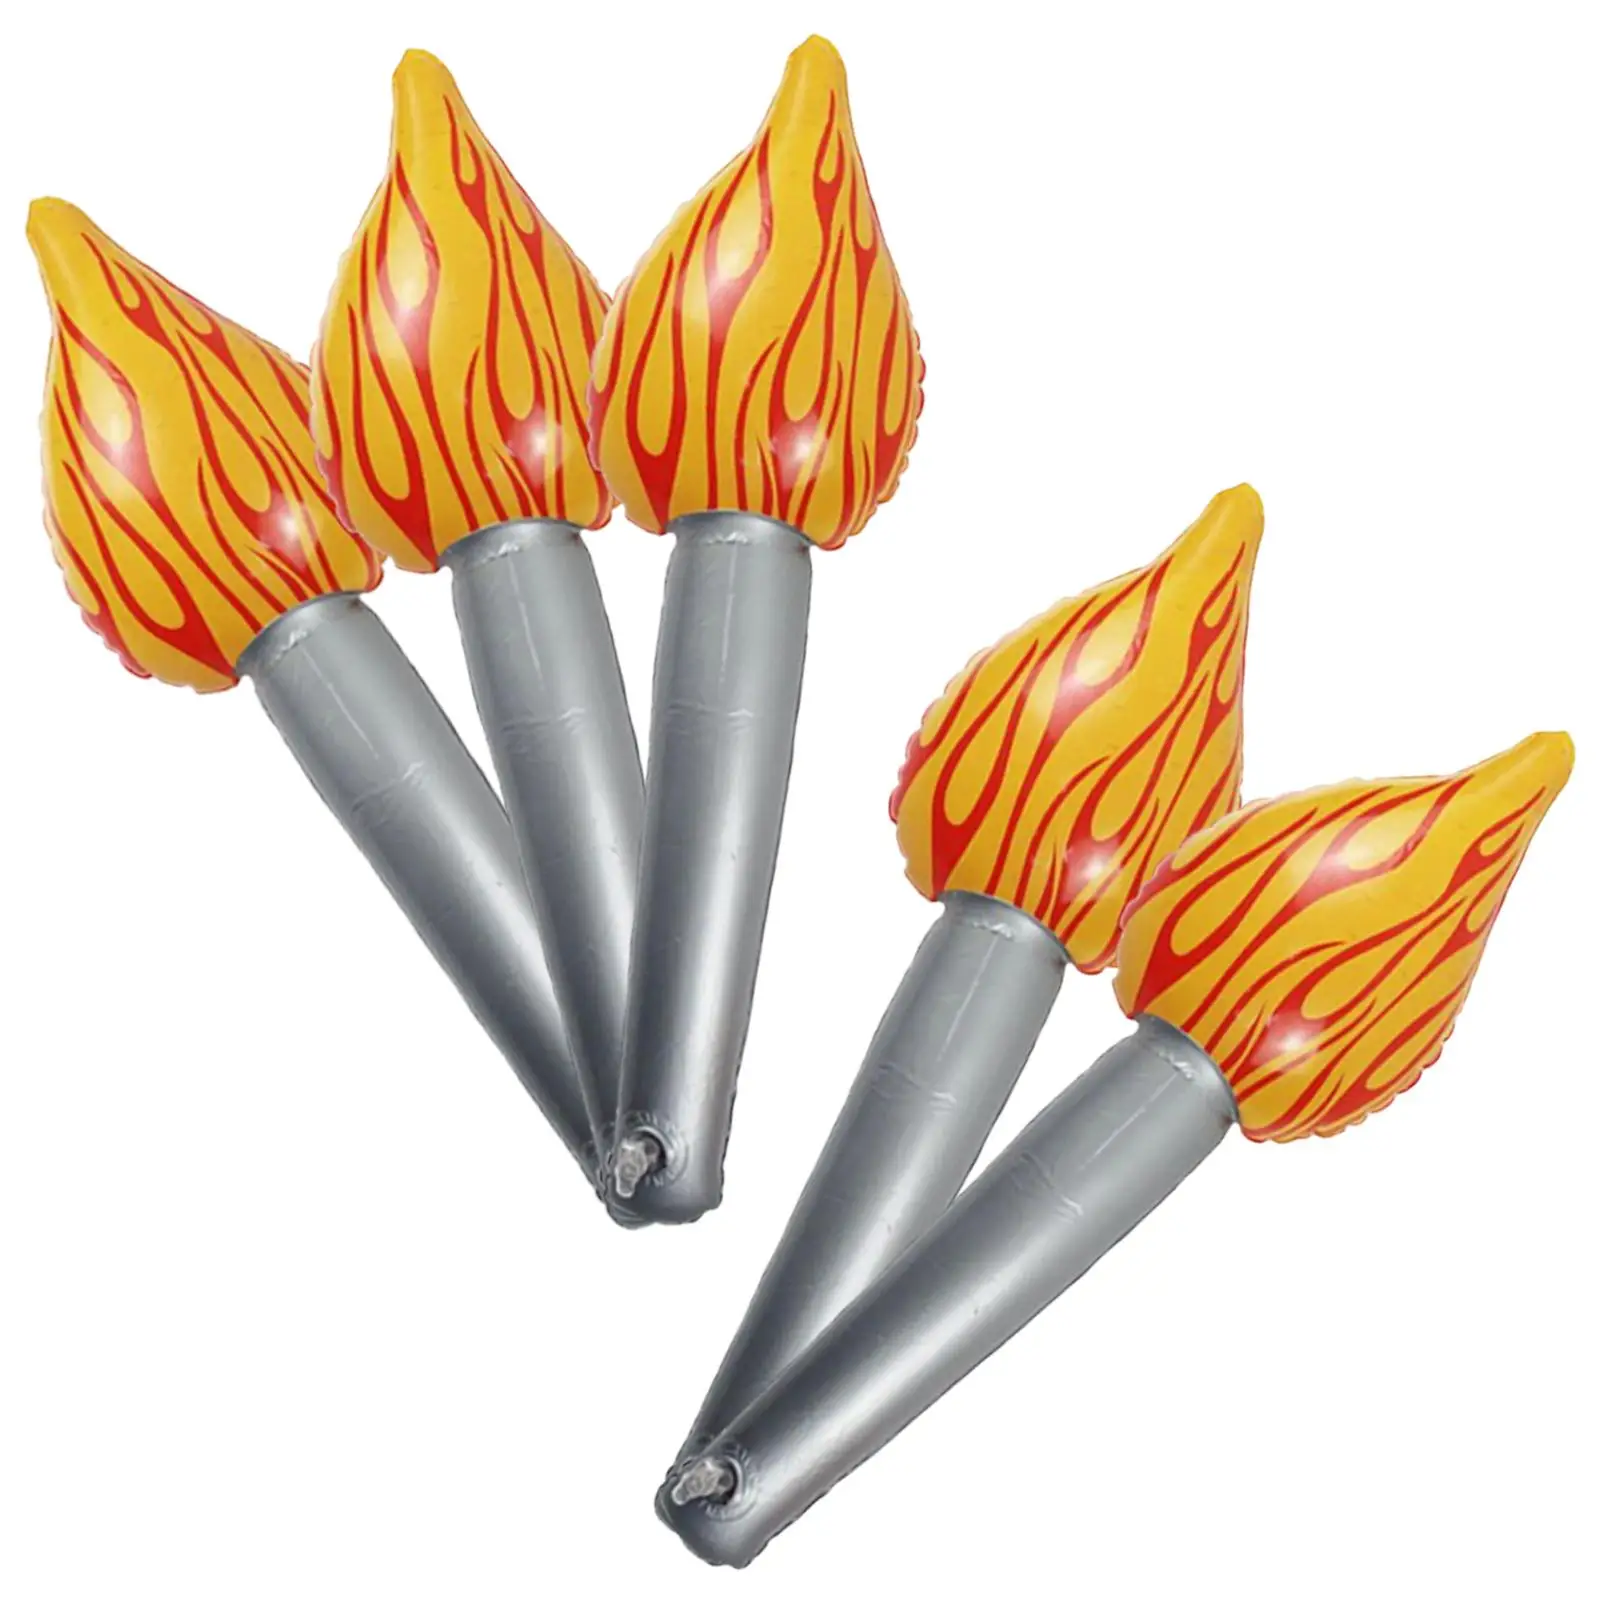 5x Inflatable Flame Toy PVC Balloons 15inch Fun Torch Balloon for Party Favors Birthday Cosplay Sports Decoration